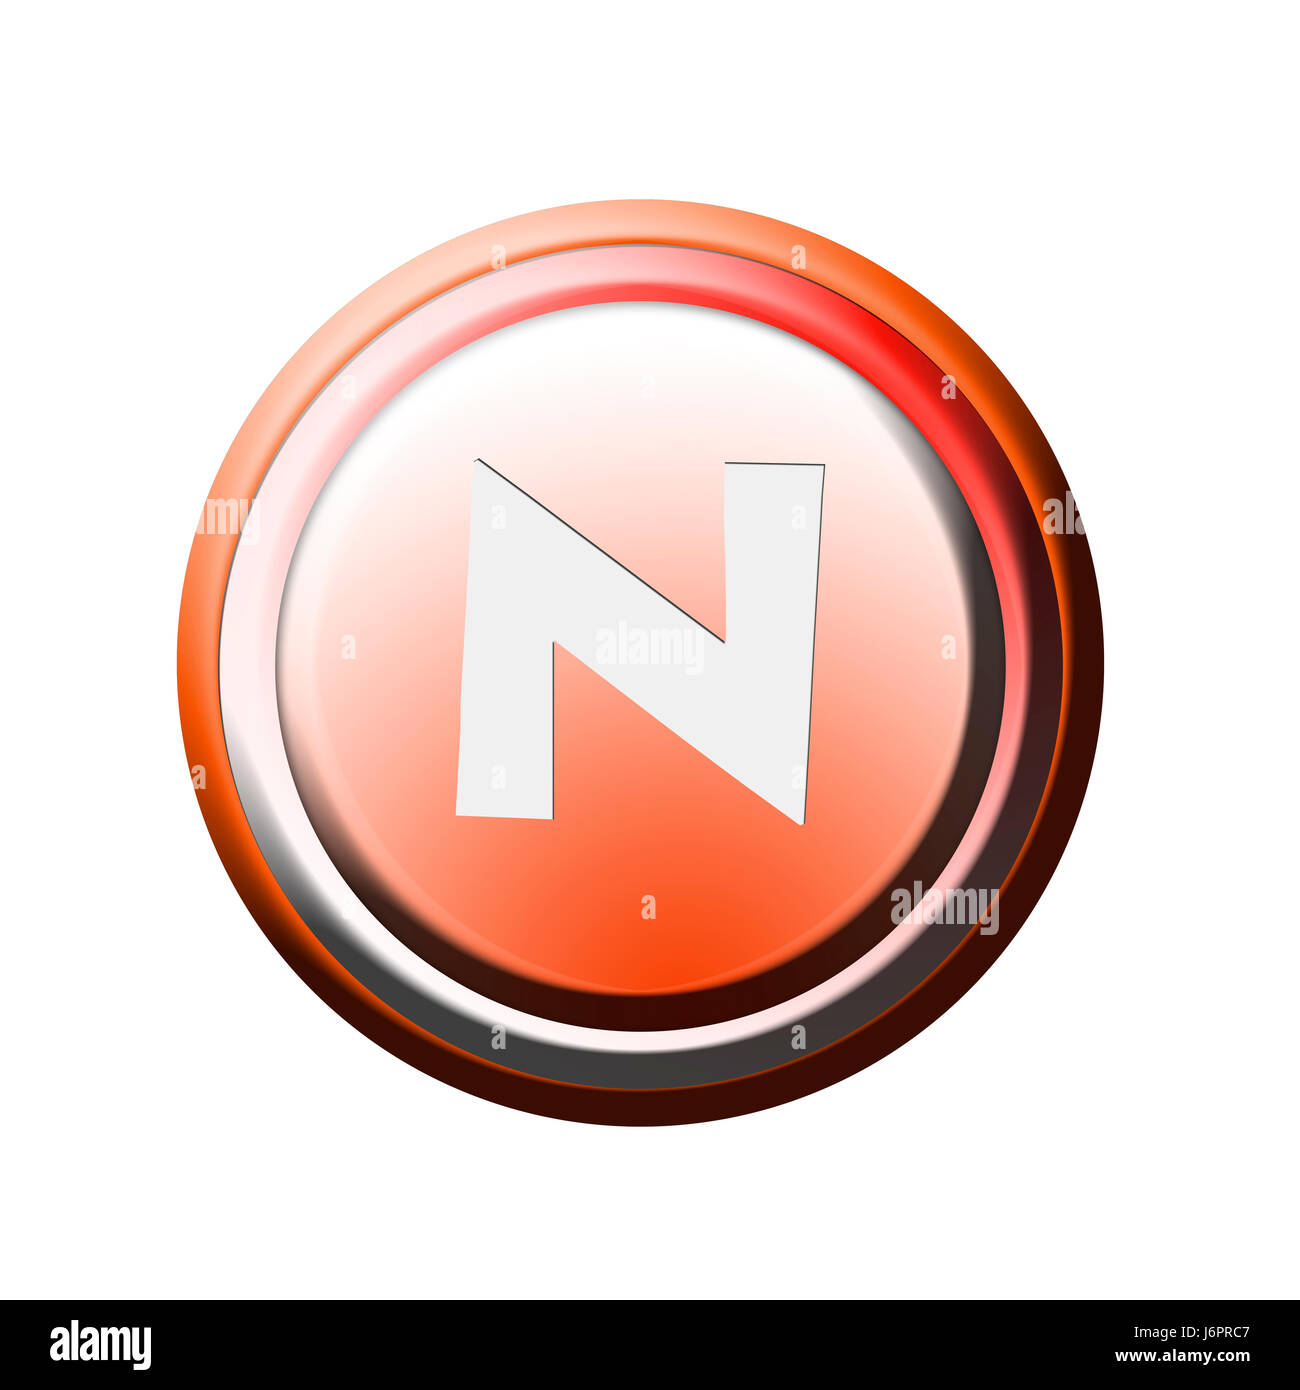 button with letter n Stock Photo